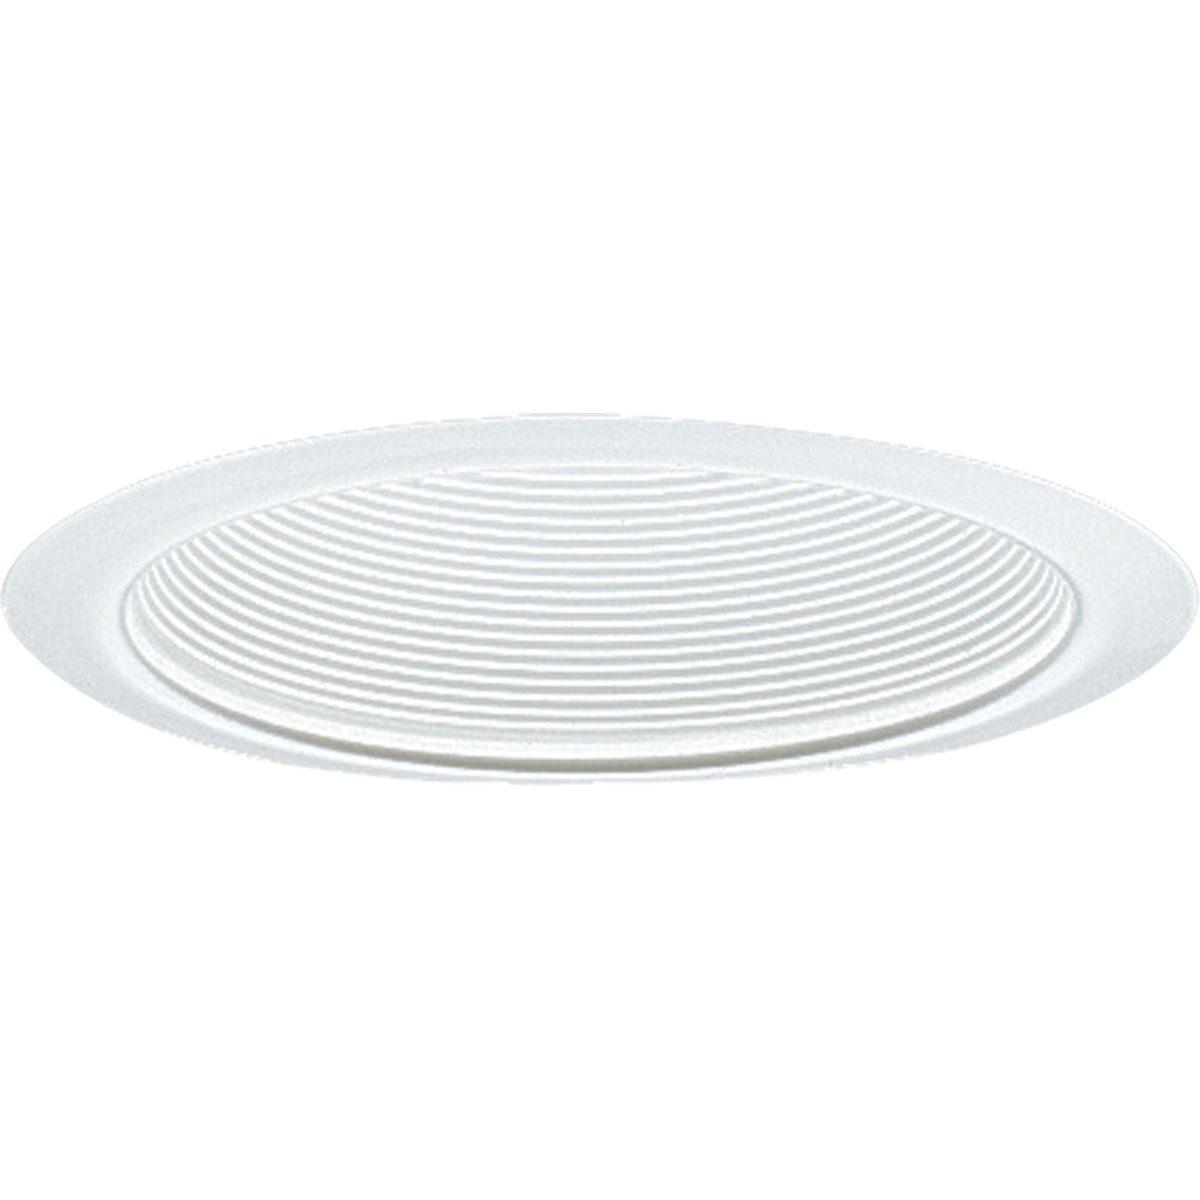 A multi-groove Step Baffle in a White finish for use with insulated ceilings. 7-3/4 in outside diameter.